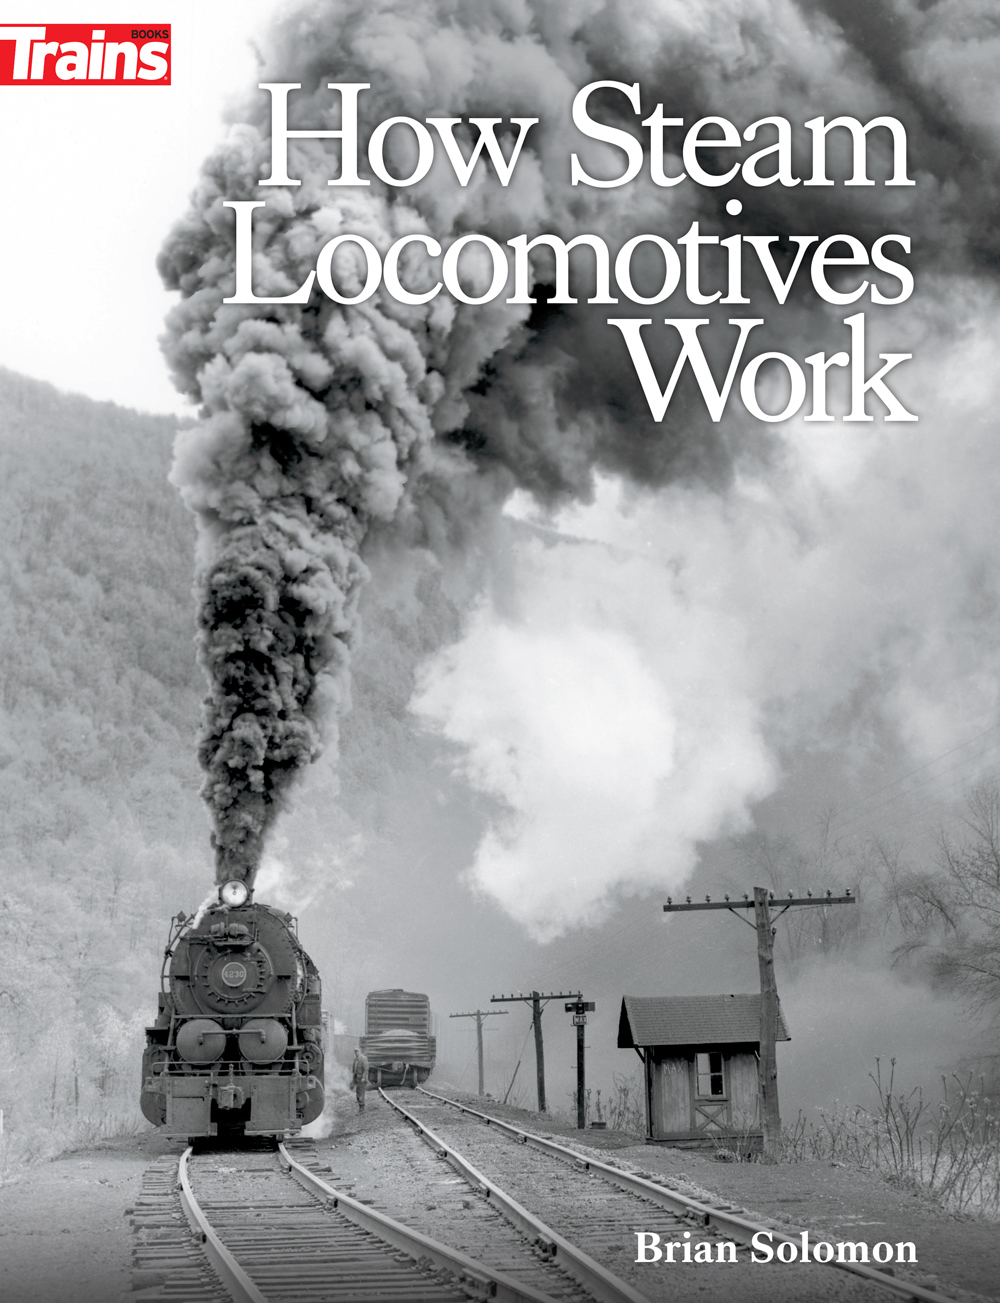 Black-and-white cover image of book with steam locomotive emitting large plume of smoke while passing train, shed, and pole line.